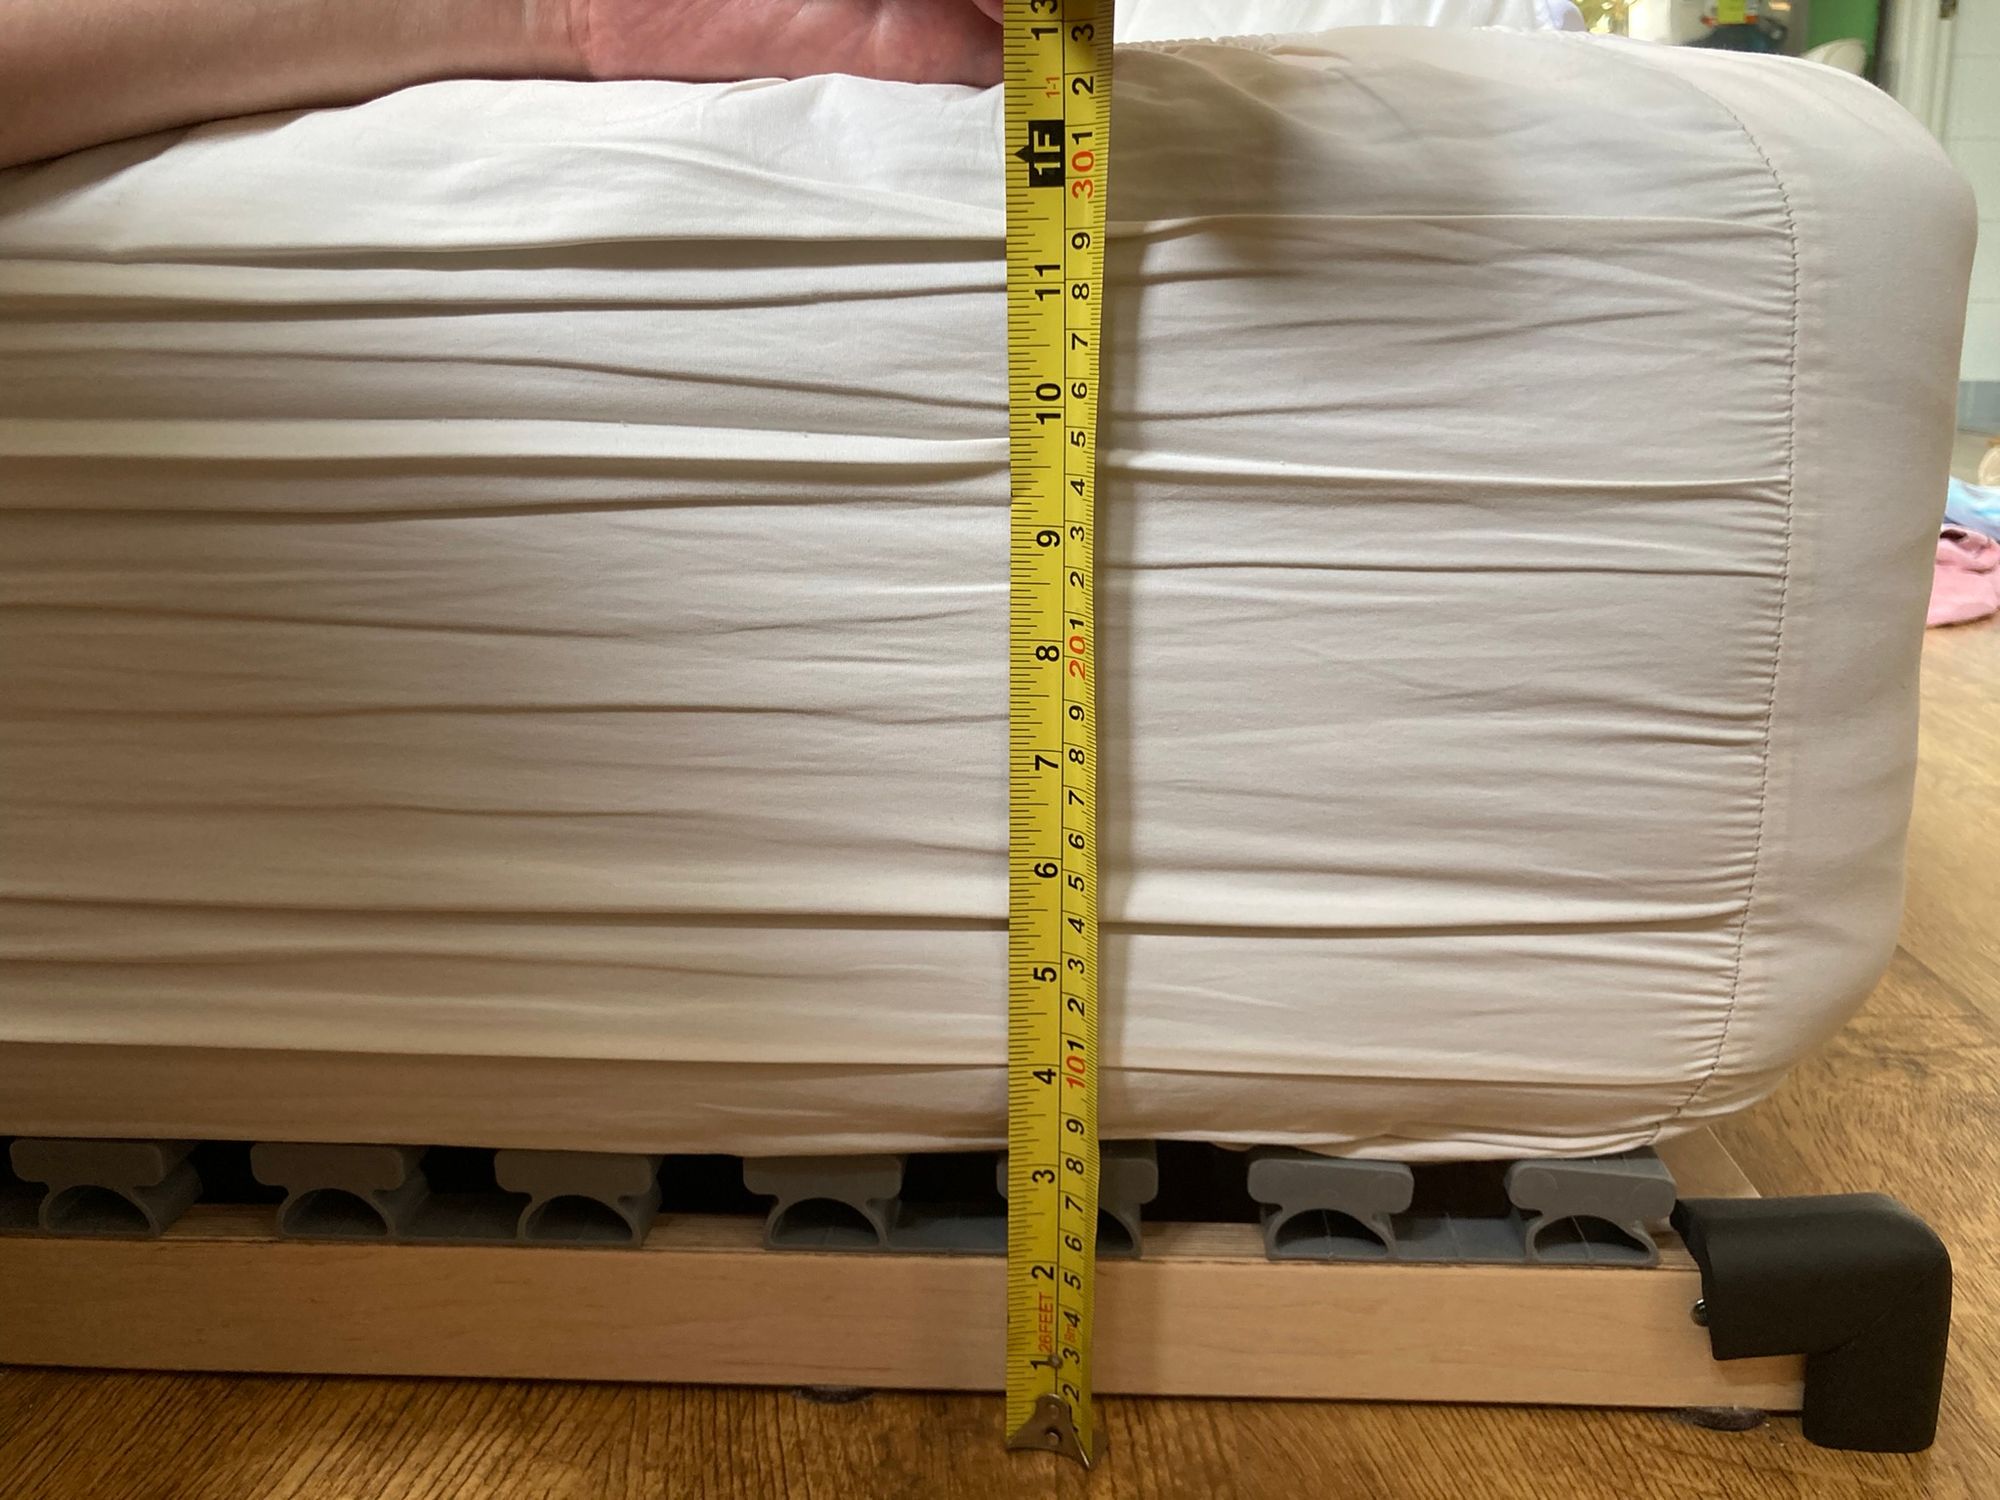 Cross section of mattress: bed base is about 8cm high, and top of mattress is 32cm off ground.